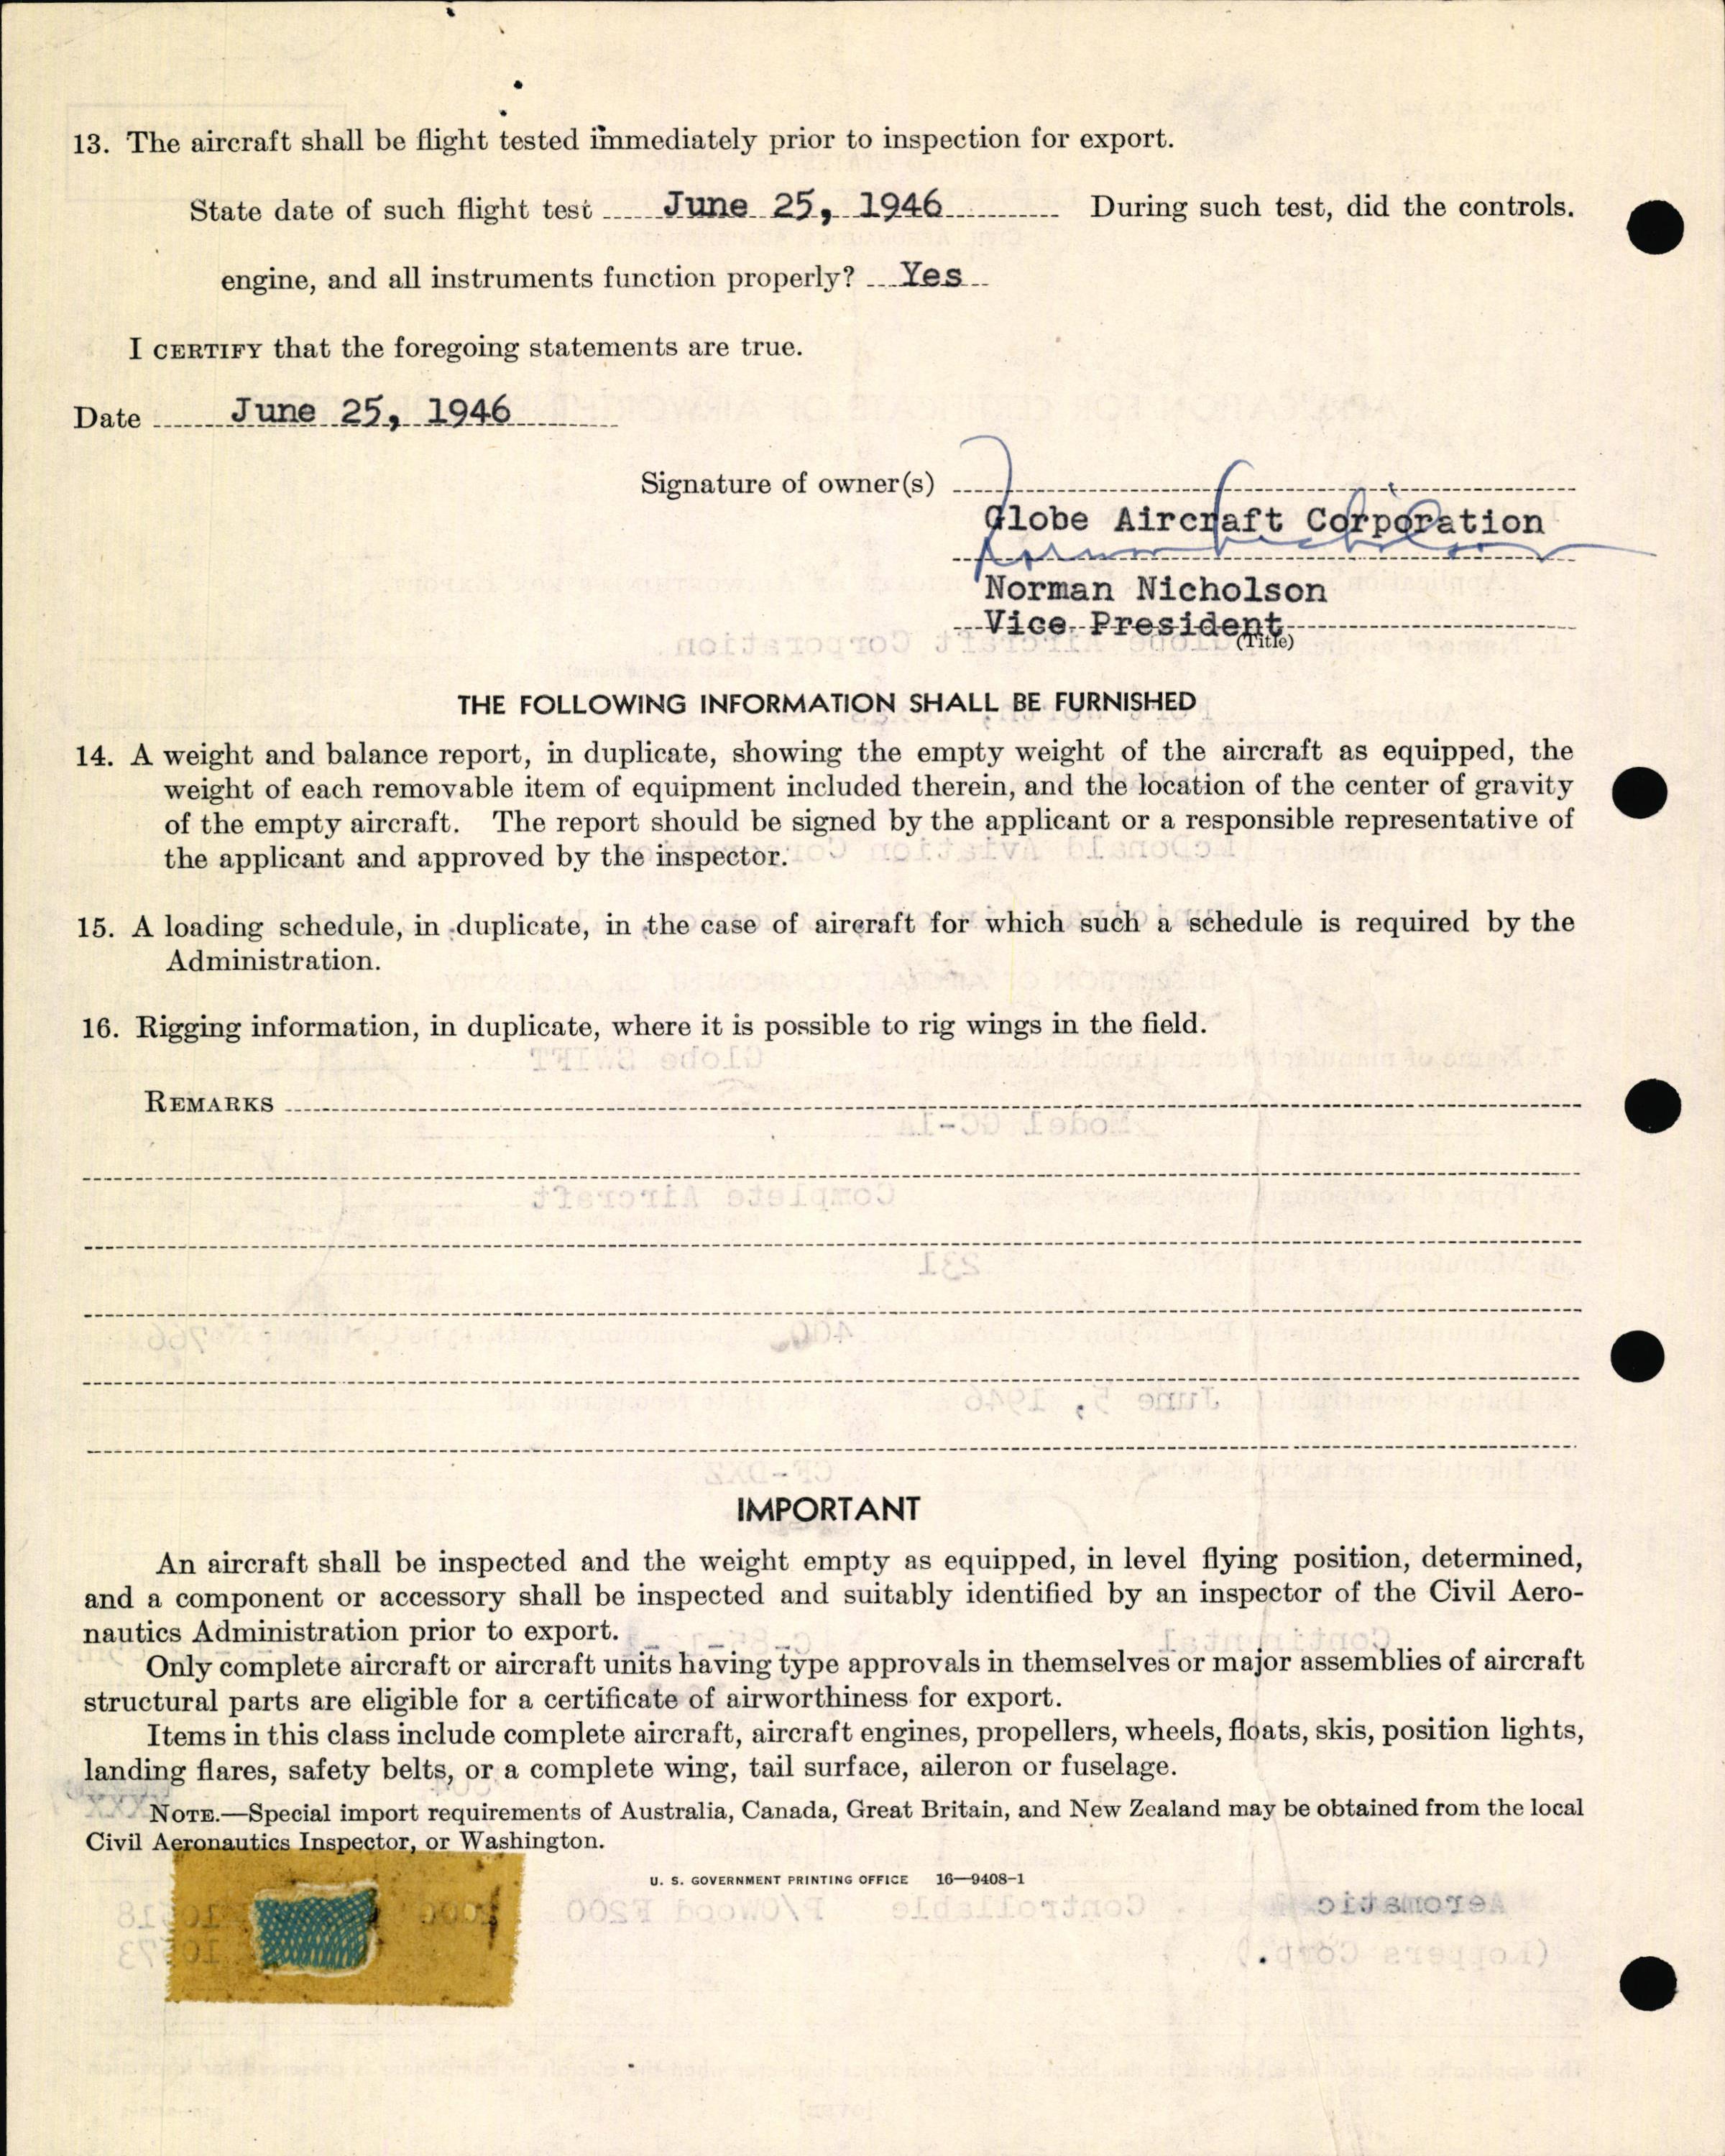 Sample page 6 from AirCorps Library document: Technical Information for Serial Number 231